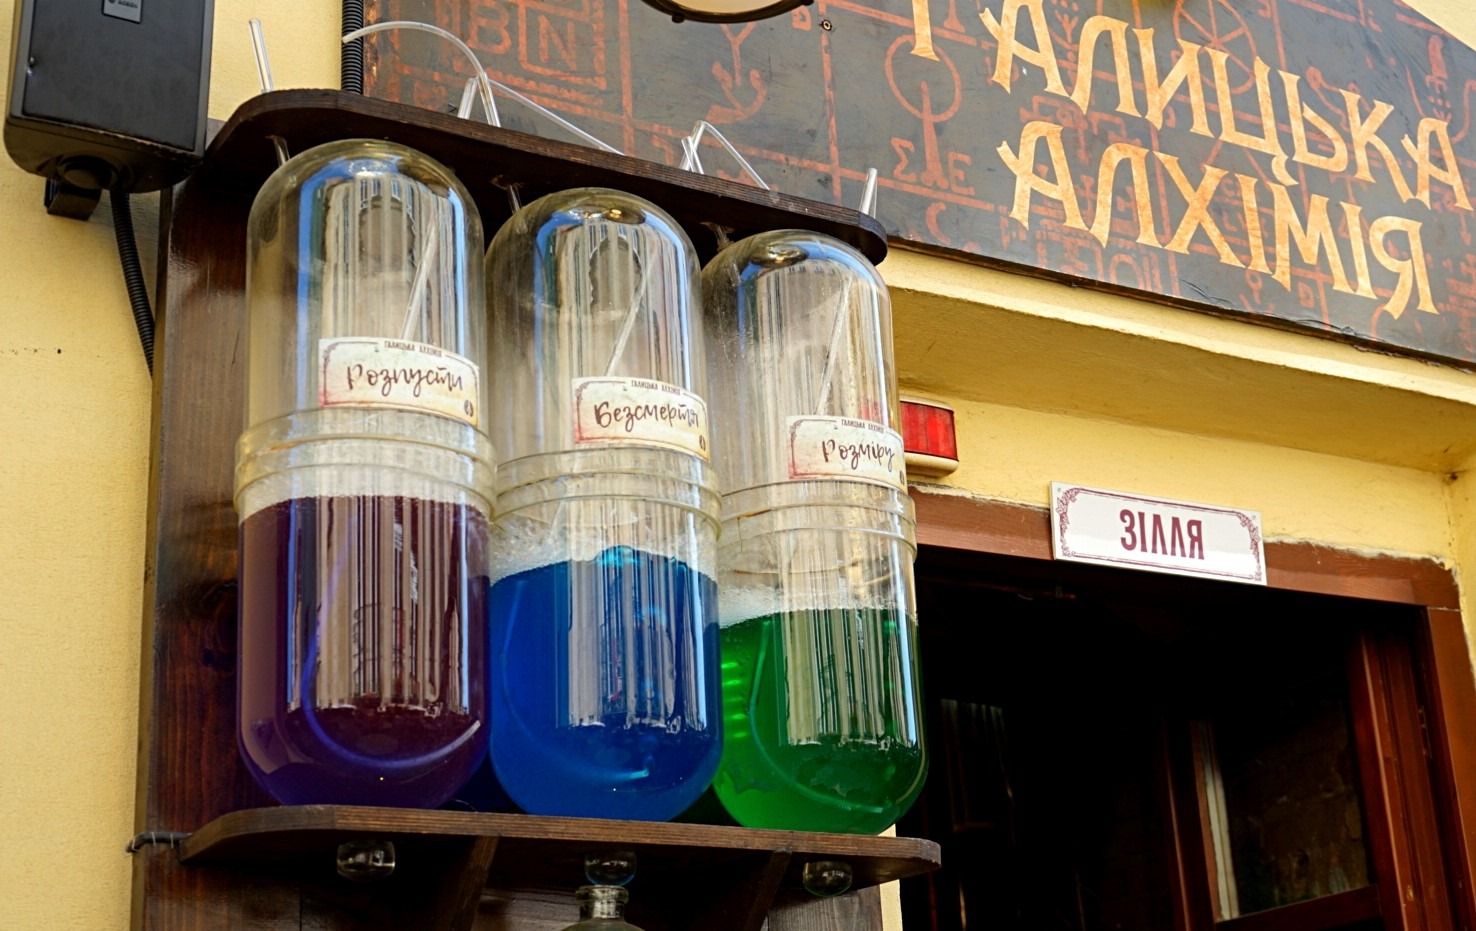 Tinctures at Galician Alchemy in Lviv